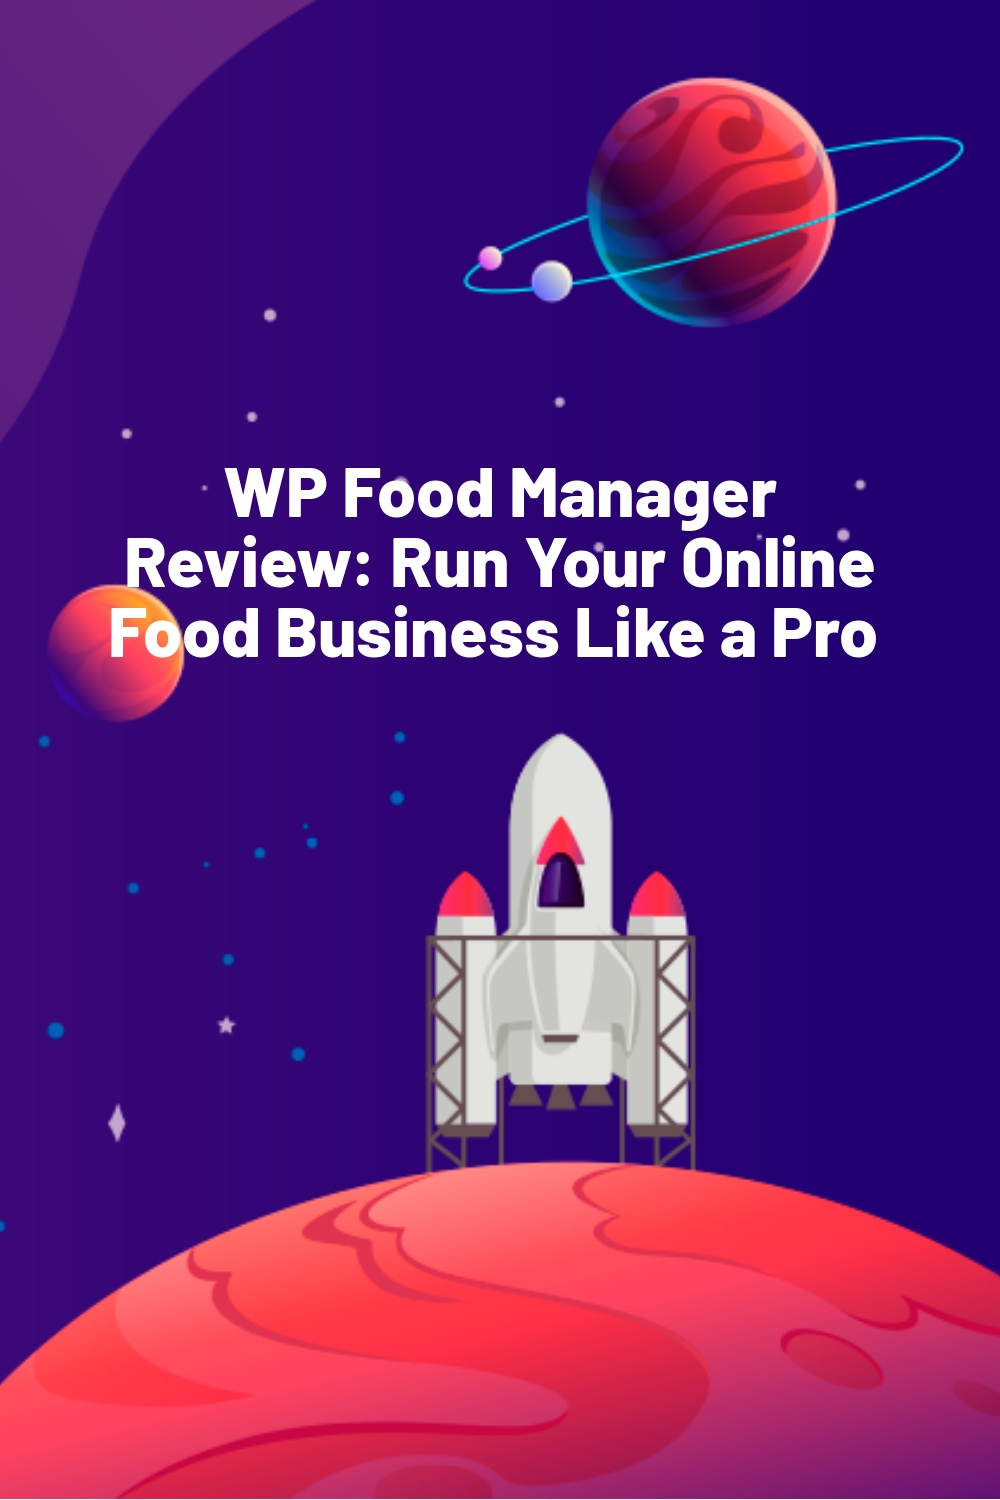 WP Food Manager Review: Run Your Online Food Business Like a Pro 